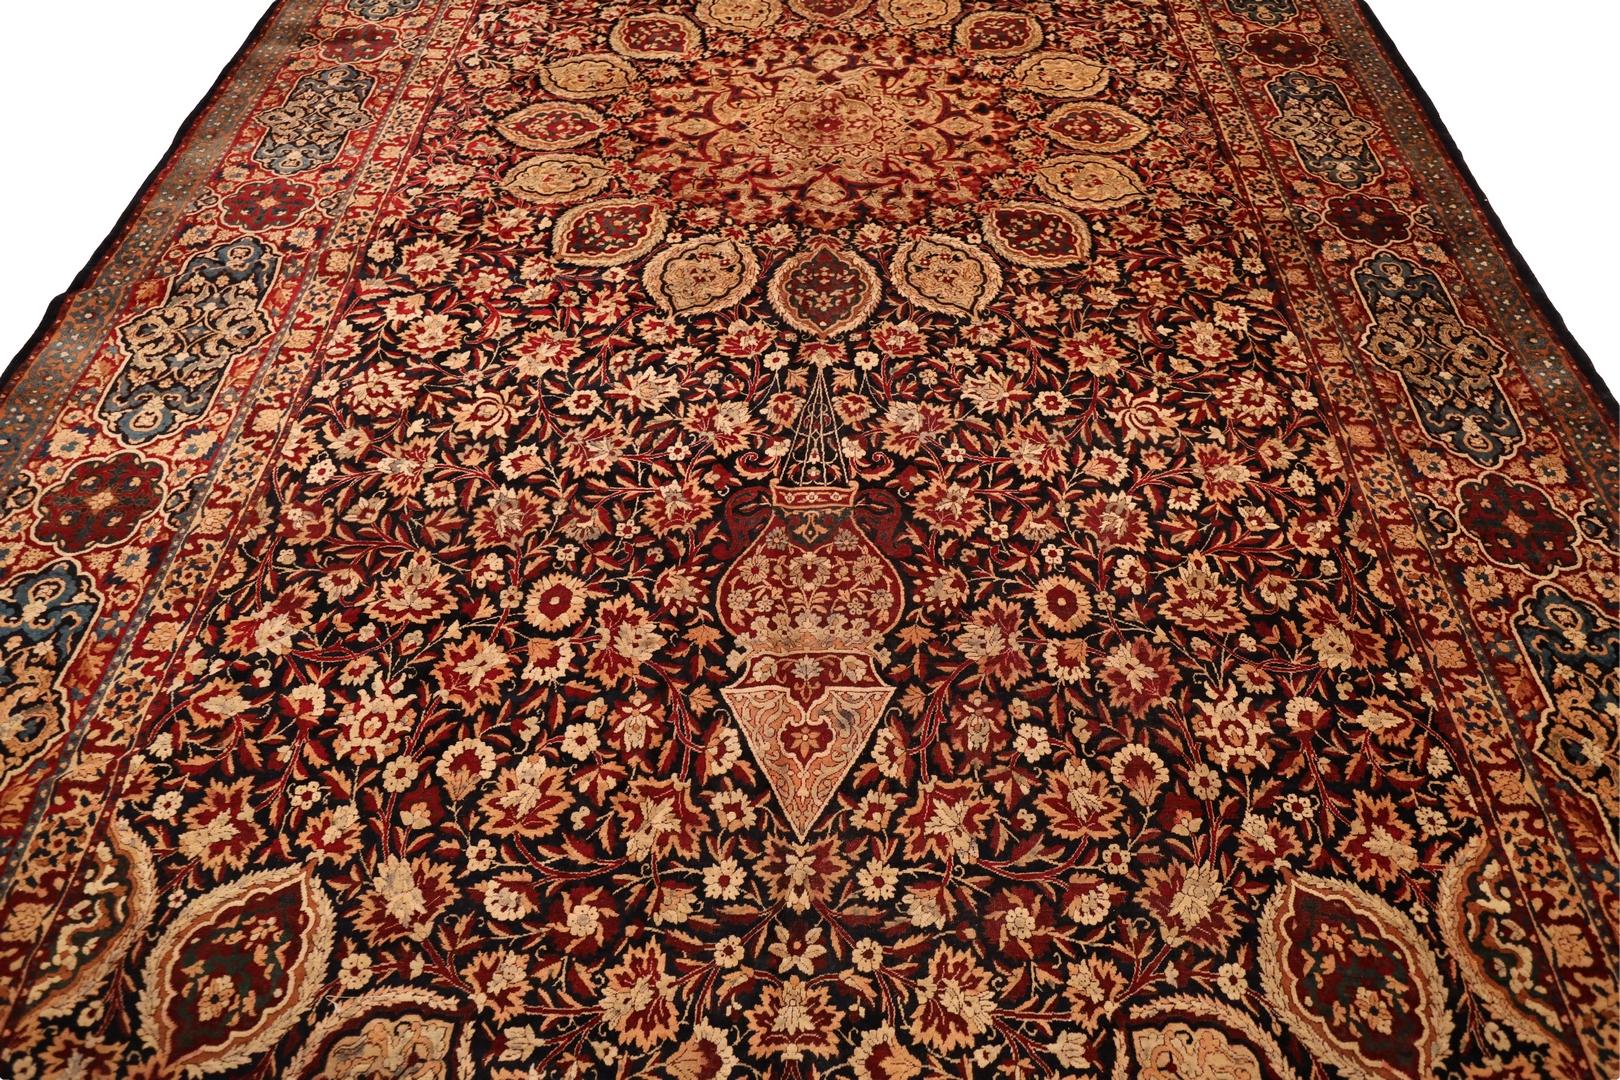 Behold the exquisite beauty of the antique Yazd-Kerman rug, a true masterpiece of Persian rug weaving. Measuring a generous 9'6